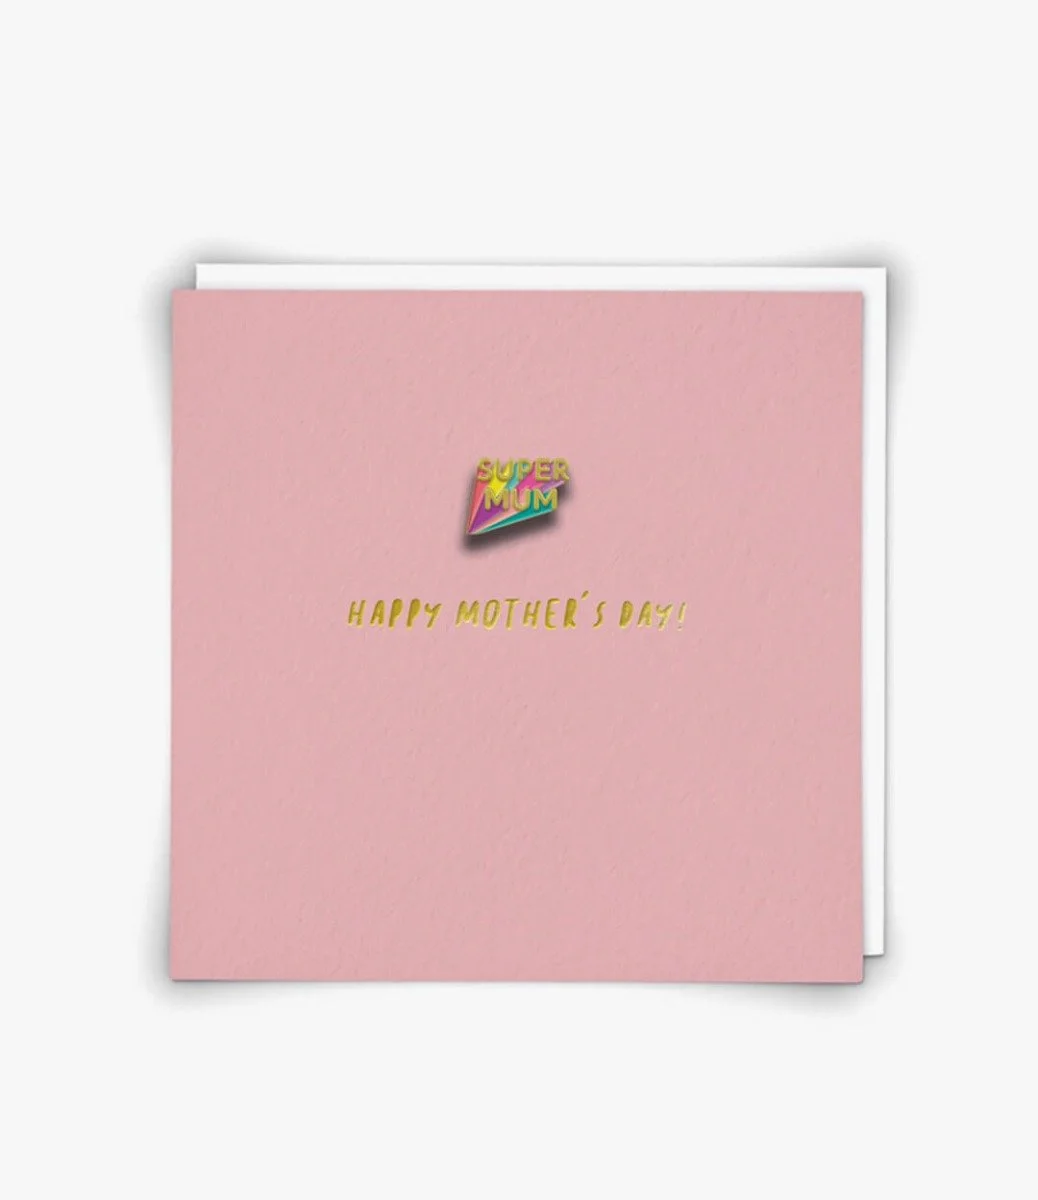 "Supermum" Contemporary Greeting Card by Redback